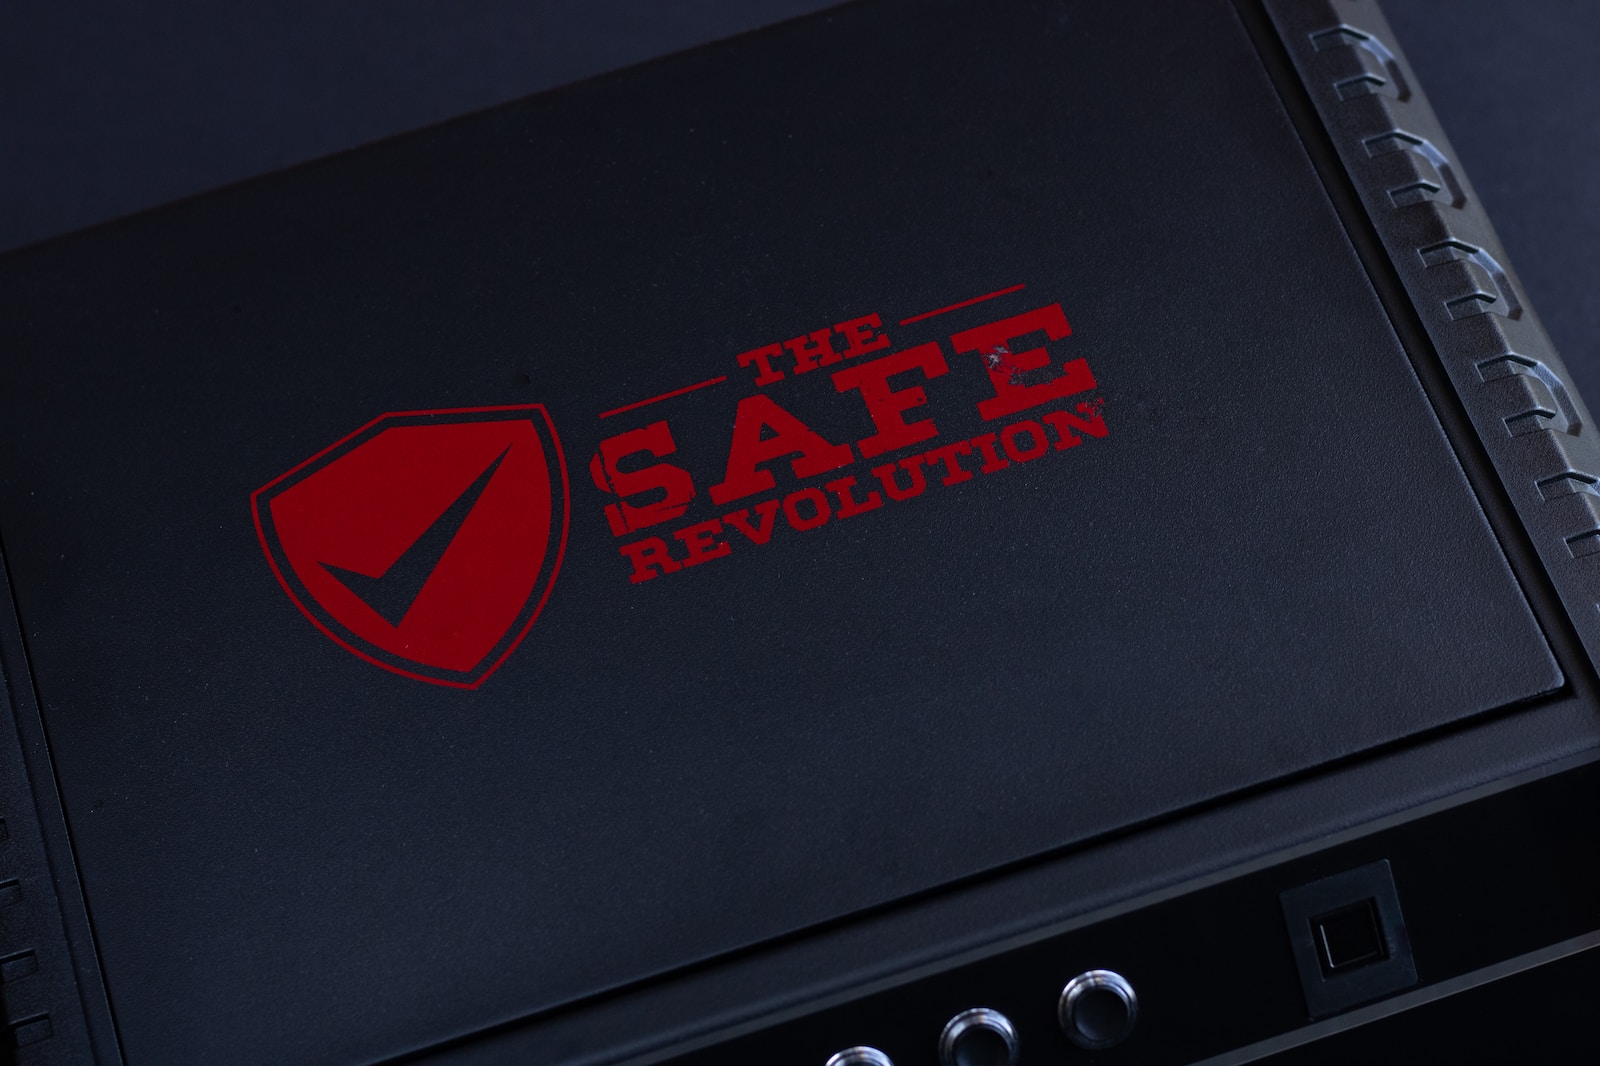 Gun Safe black and red UNK device